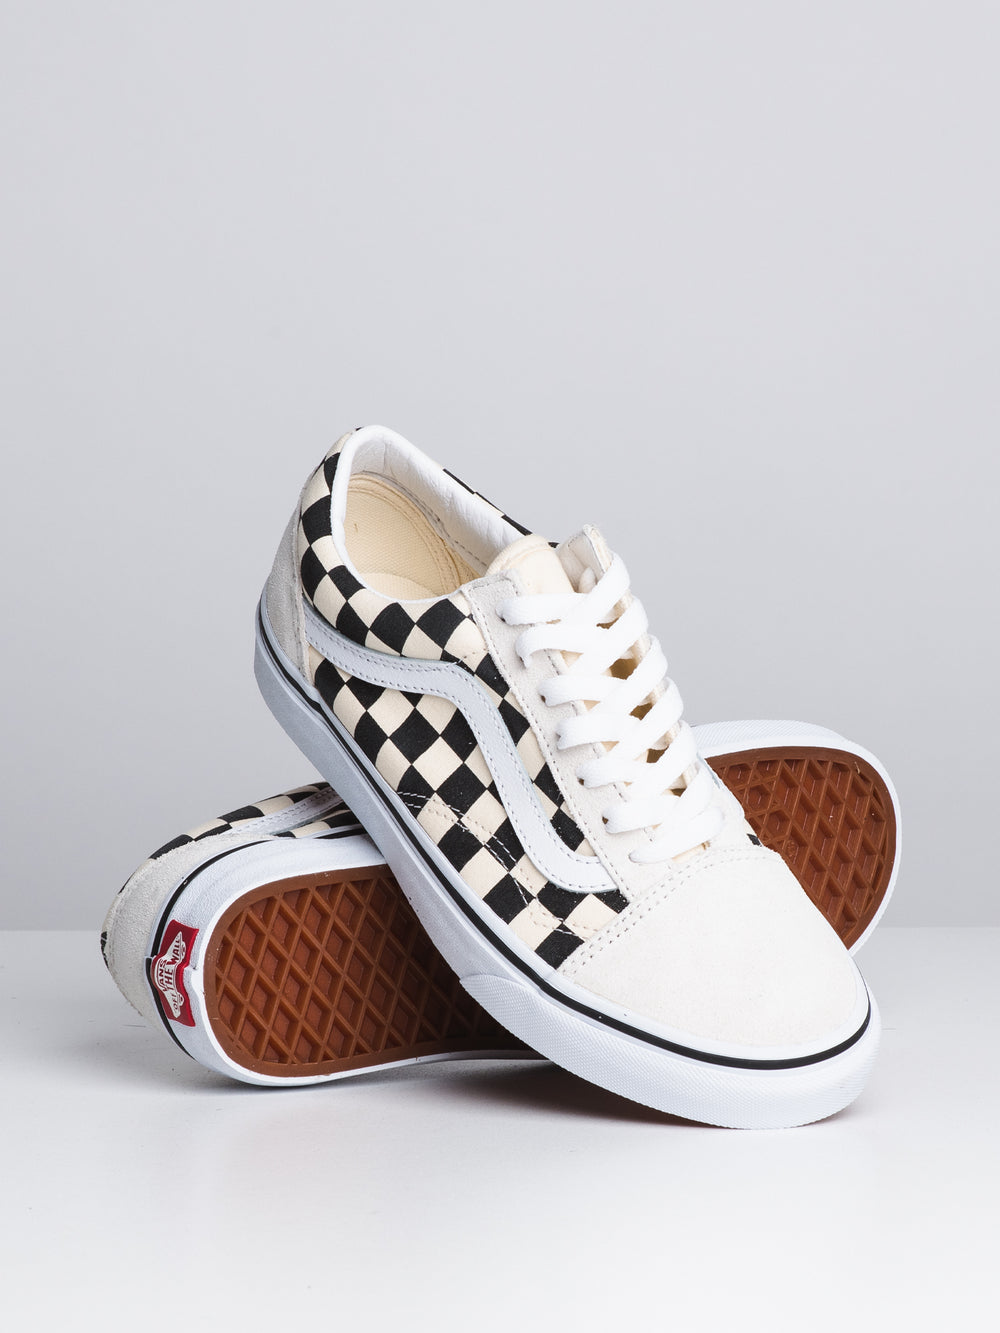 CHAUSSURES OLD SKOOL POUR FEMME